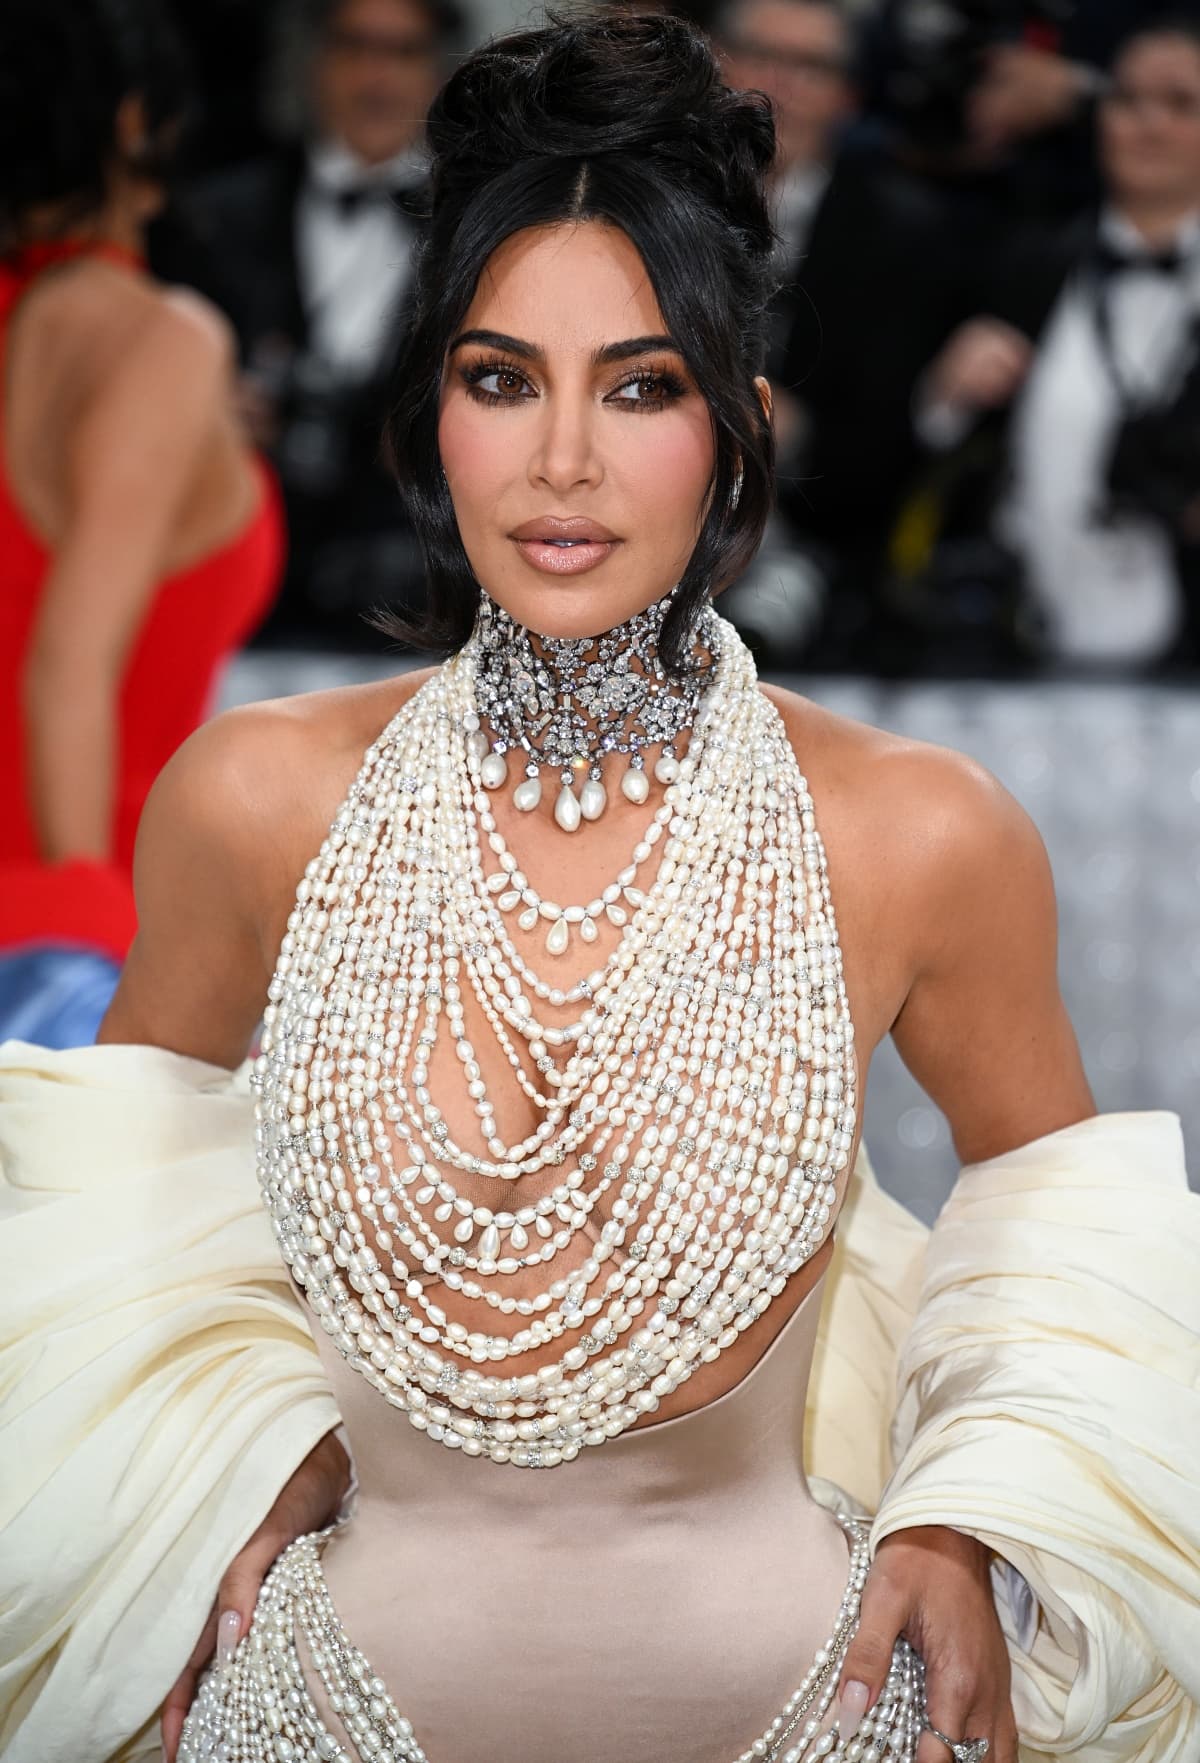 Kim Kardashian swept her hair up in a dramatic updo to effectively show off her diamonds, pearls, and crystals